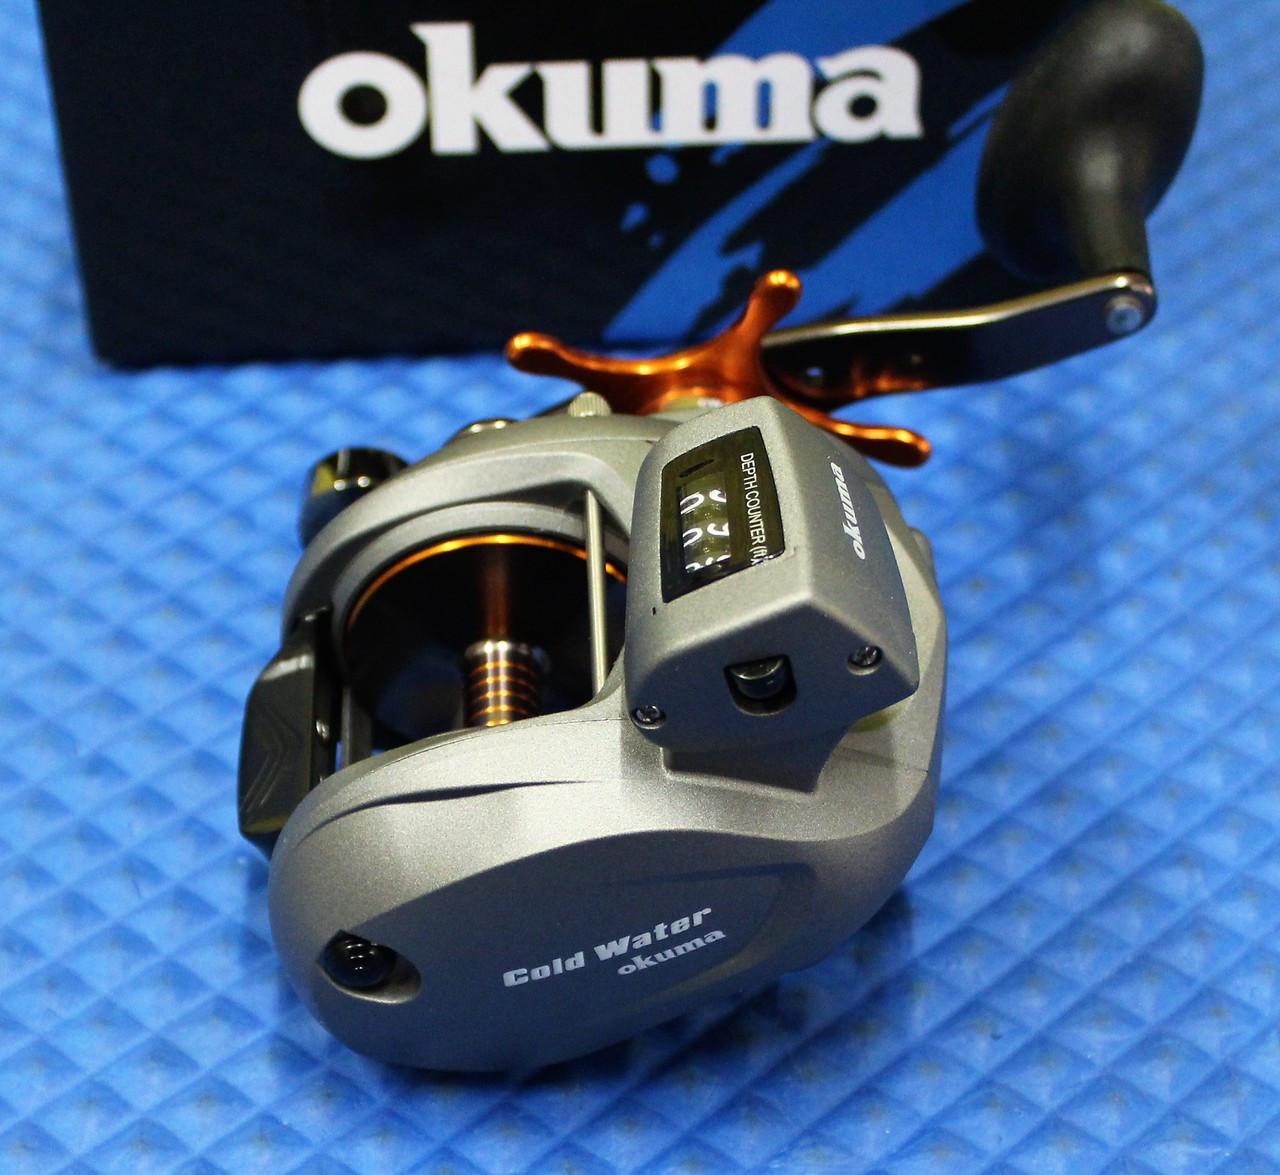 Okuma Cold Water Low Profile Line Counter Trolling Reels CHOOSE YOUR MODEL!  - La Paz County Sheriff's Office Dedicated to Service